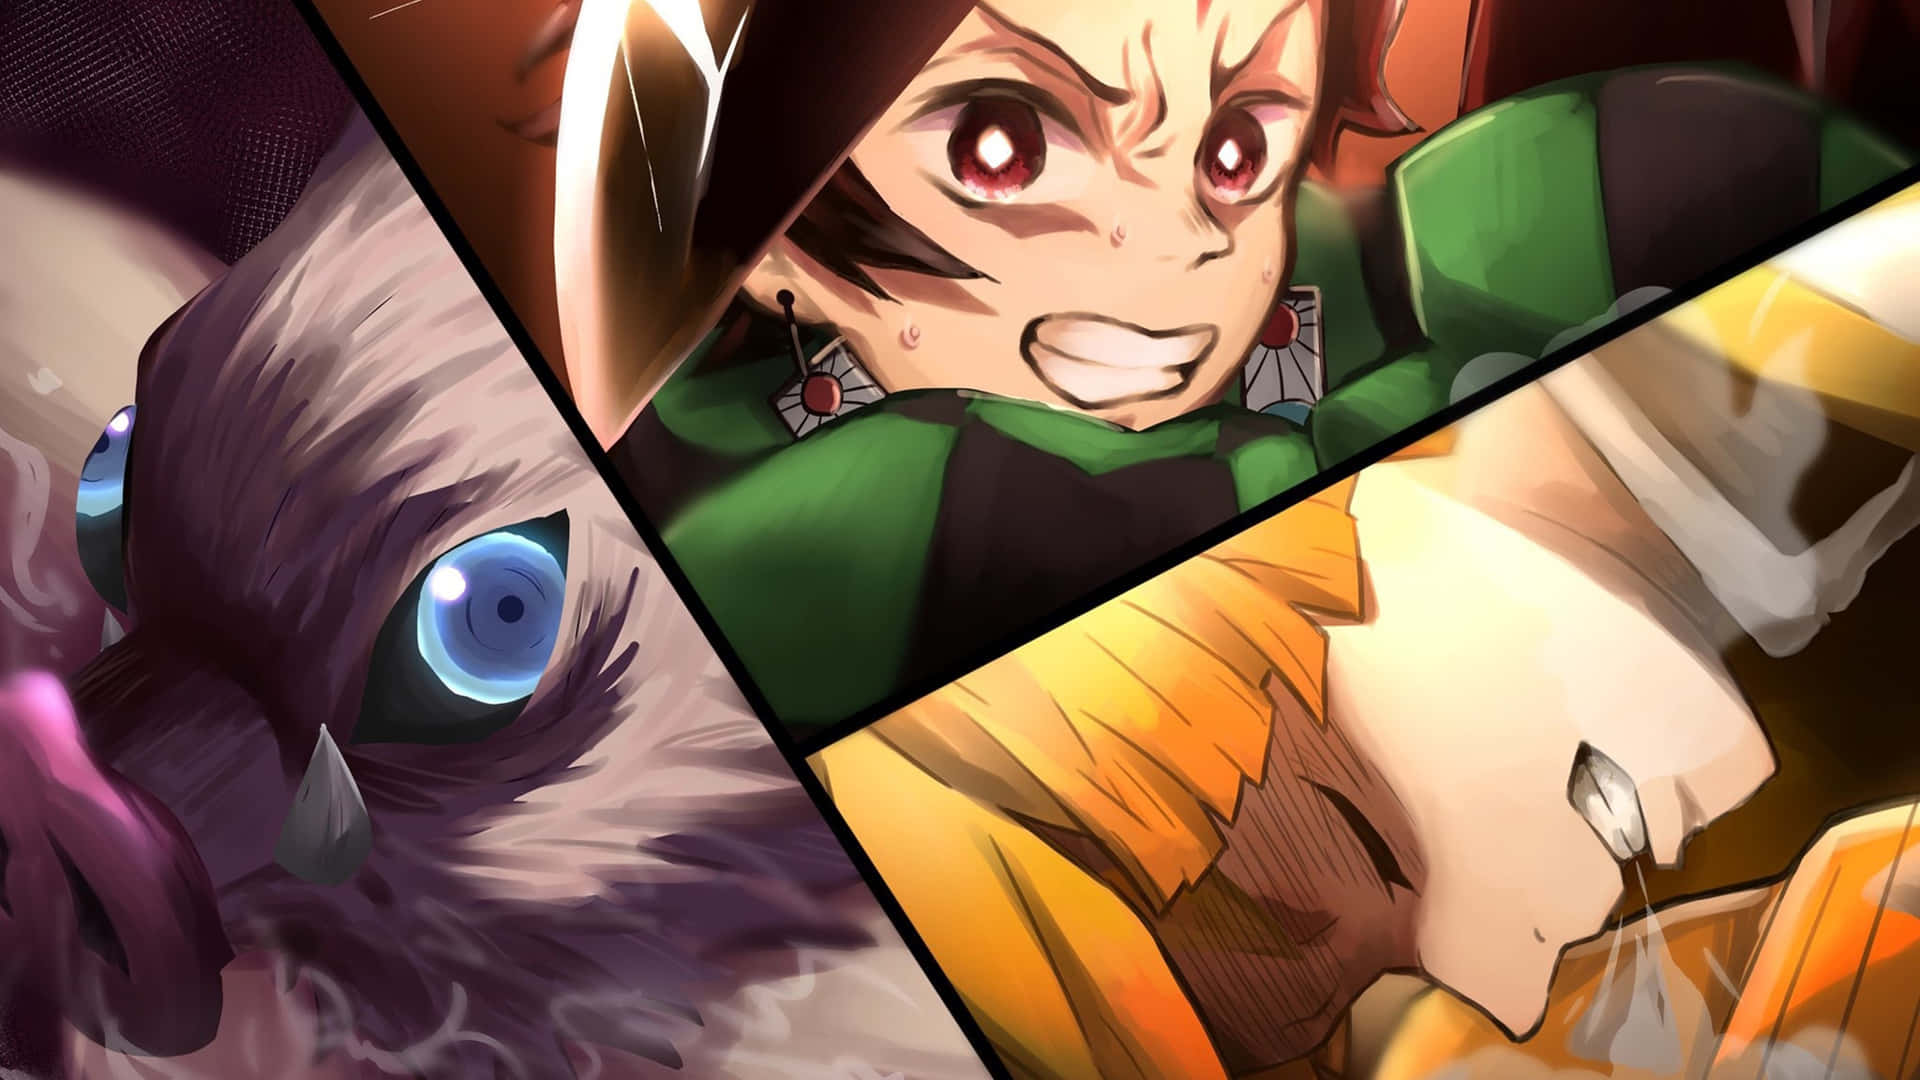 Get inspired by Zenitsu and demonstrate the courage of a Demon Slayer! Wallpaper